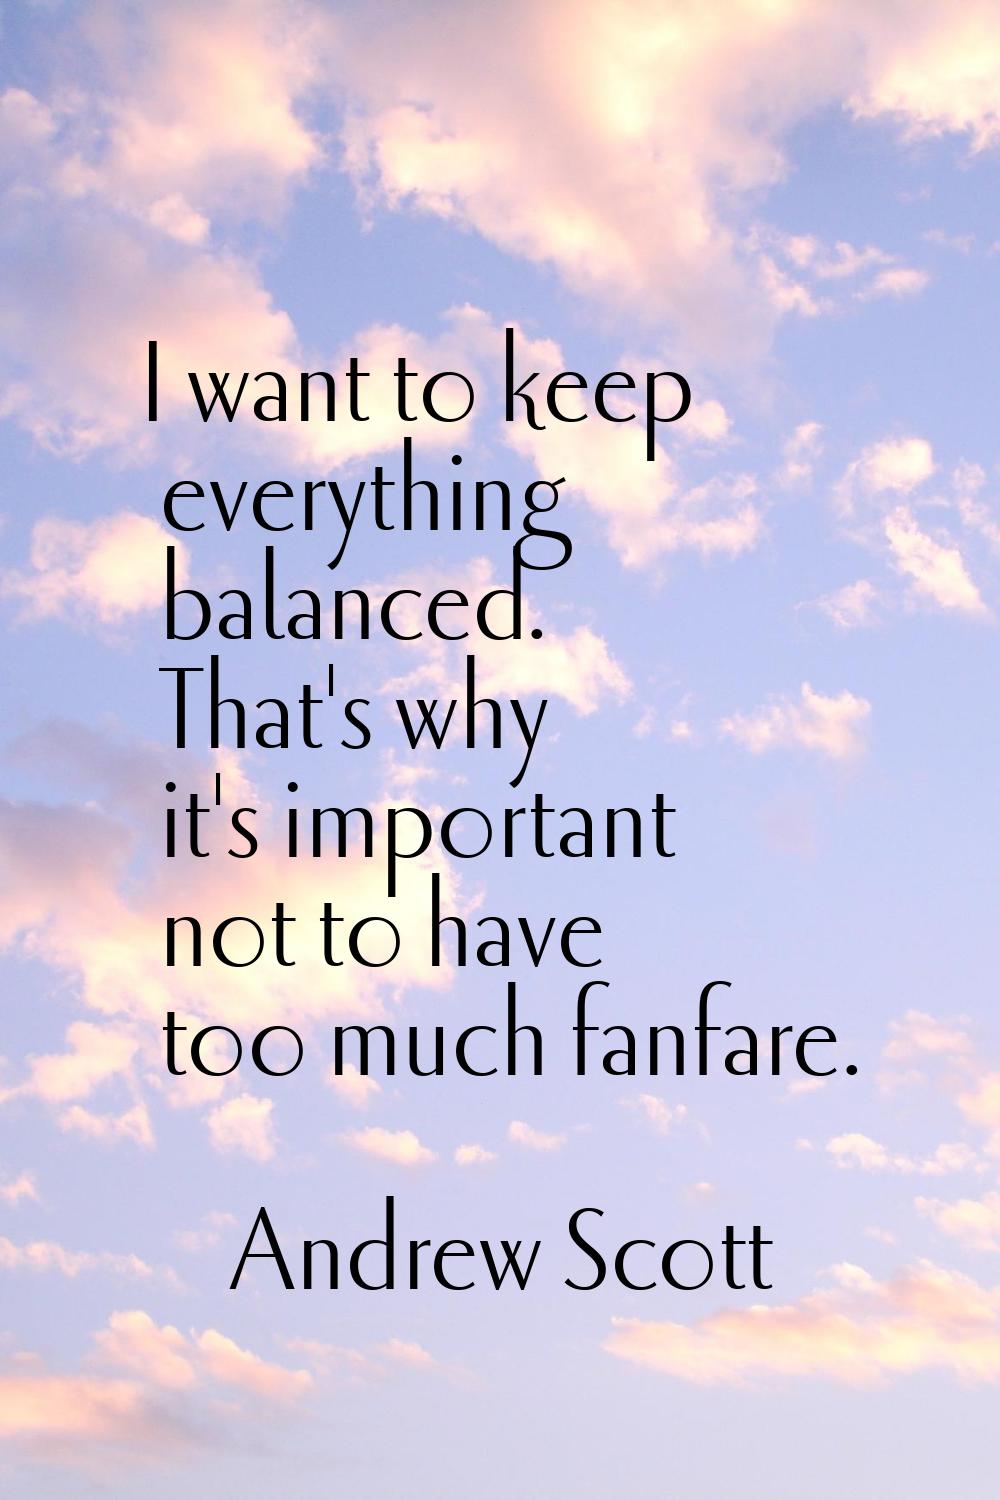 I want to keep everything balanced. That's why it's important not to have too much fanfare.